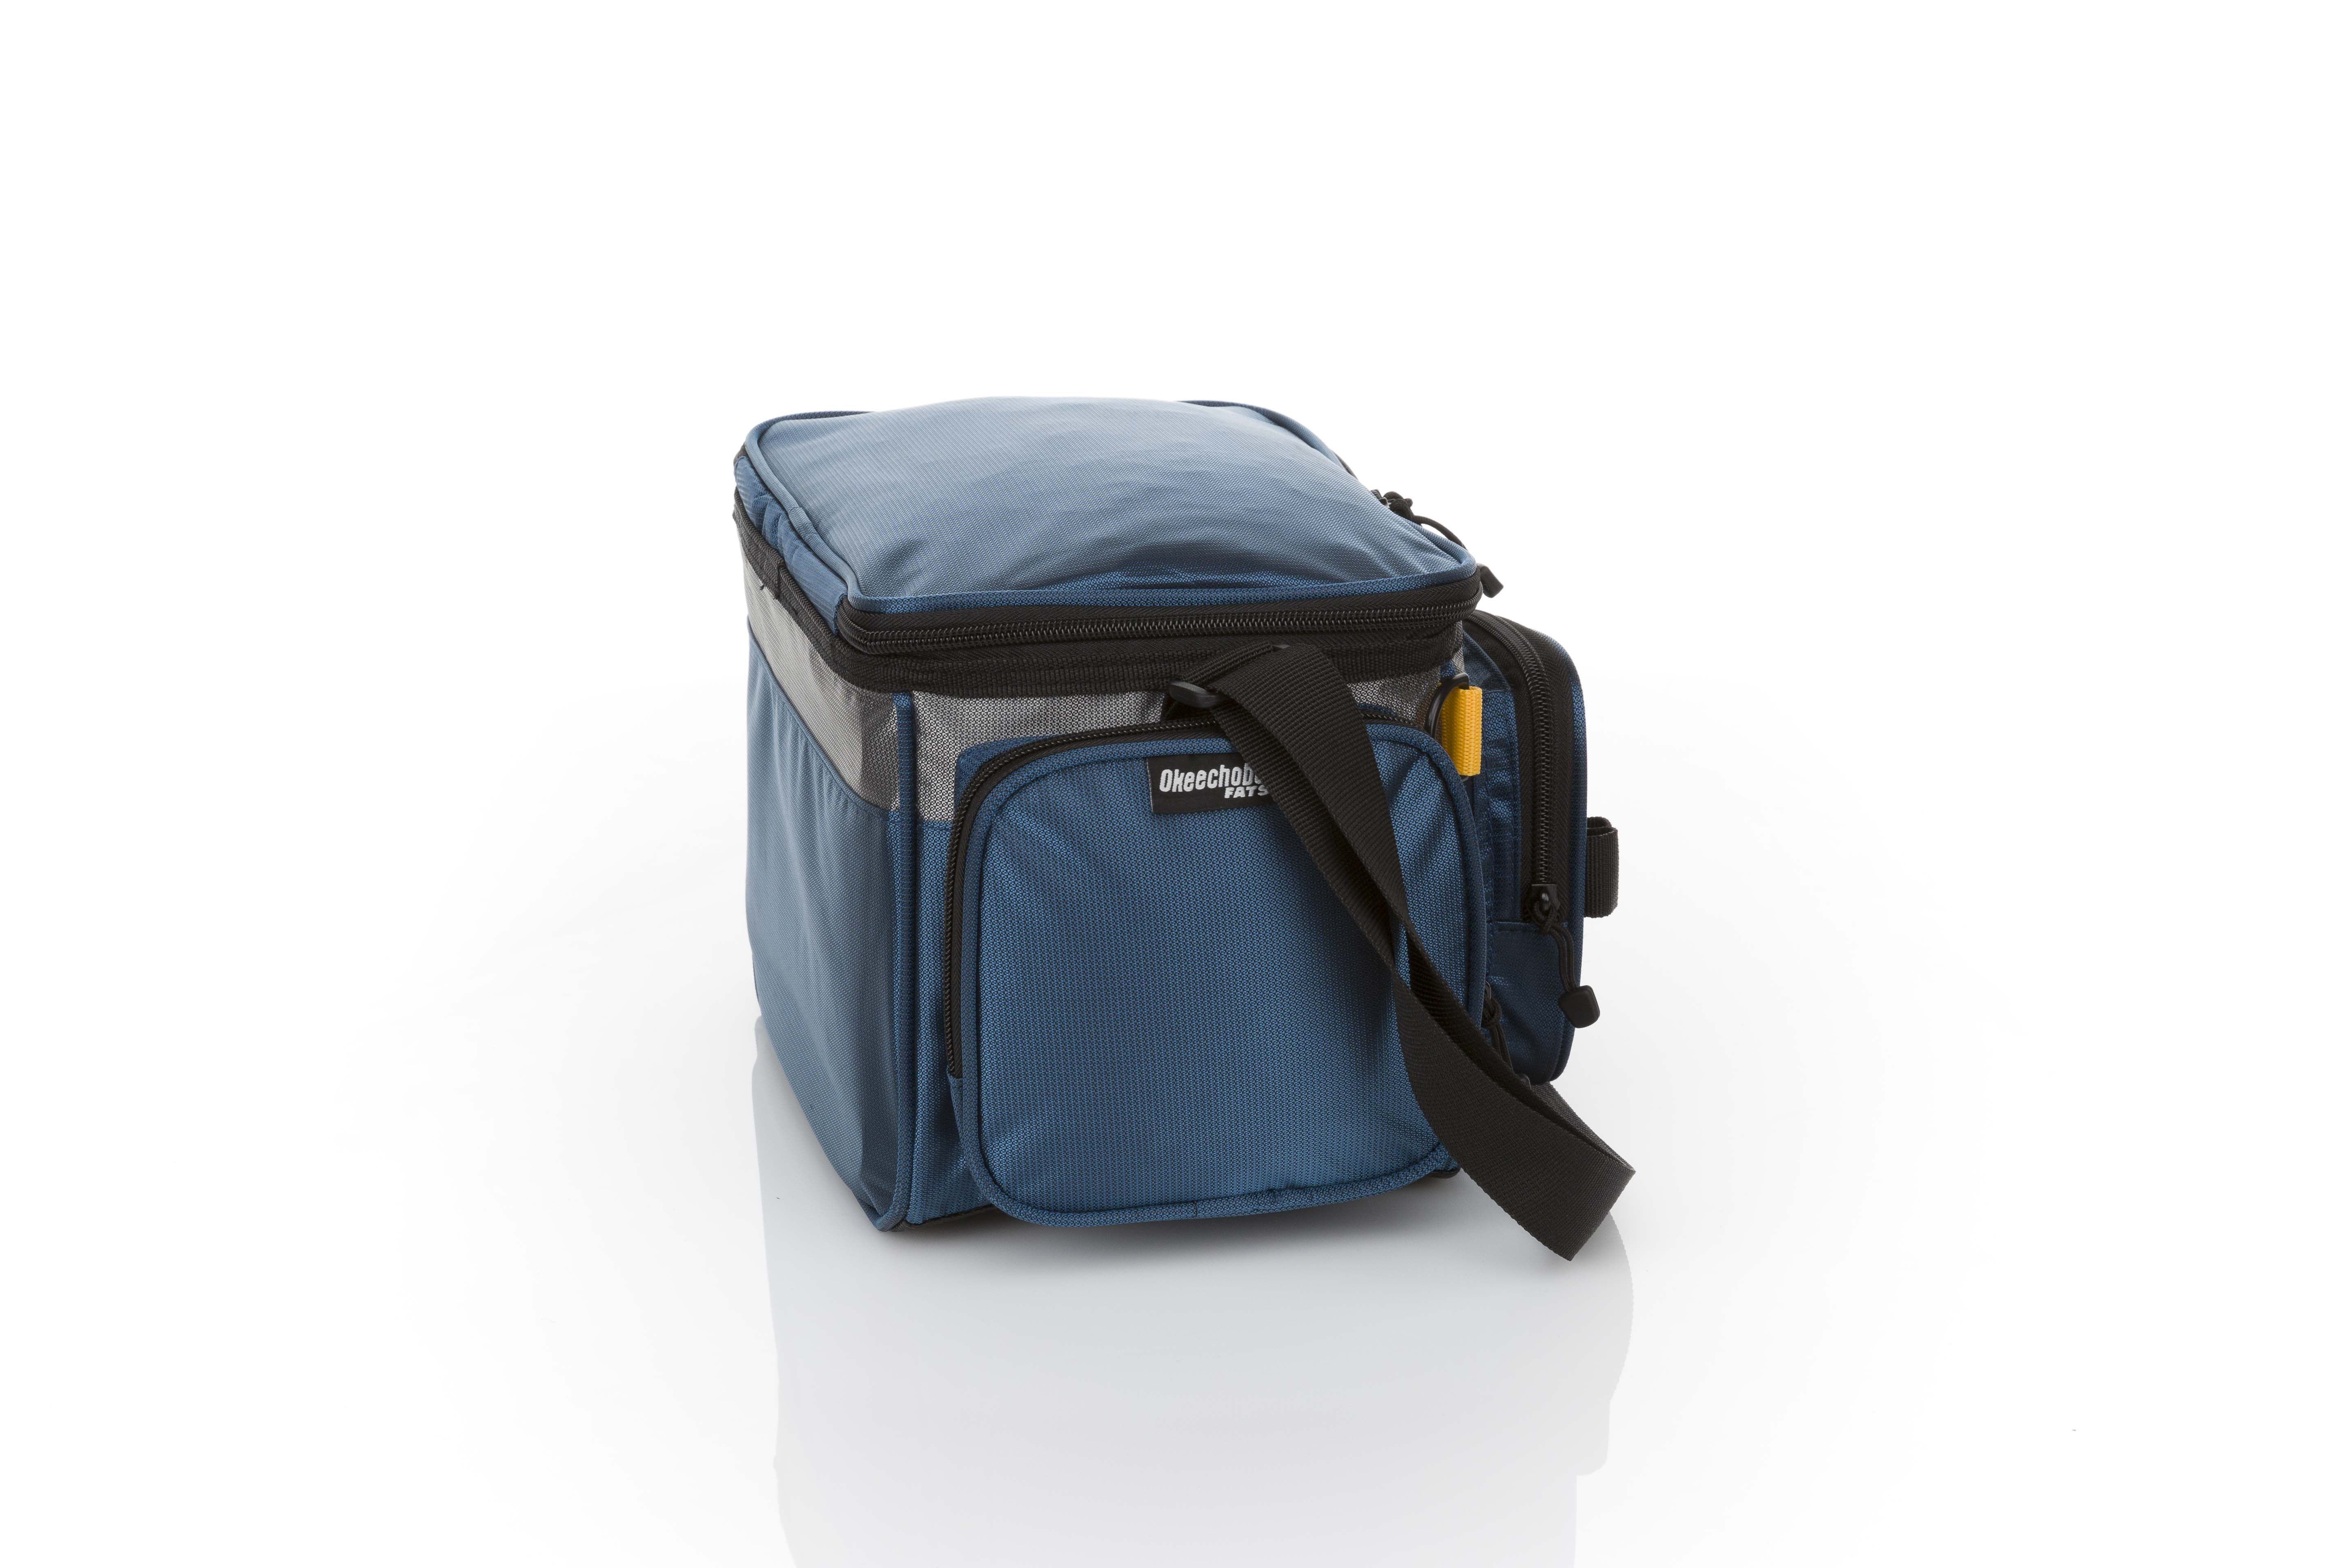 OKEECHOBEE FATS FISHING Chest Tackle Bag for Fly Fishing, Small Soft-Sided,  Blue $32.78 - PicClick